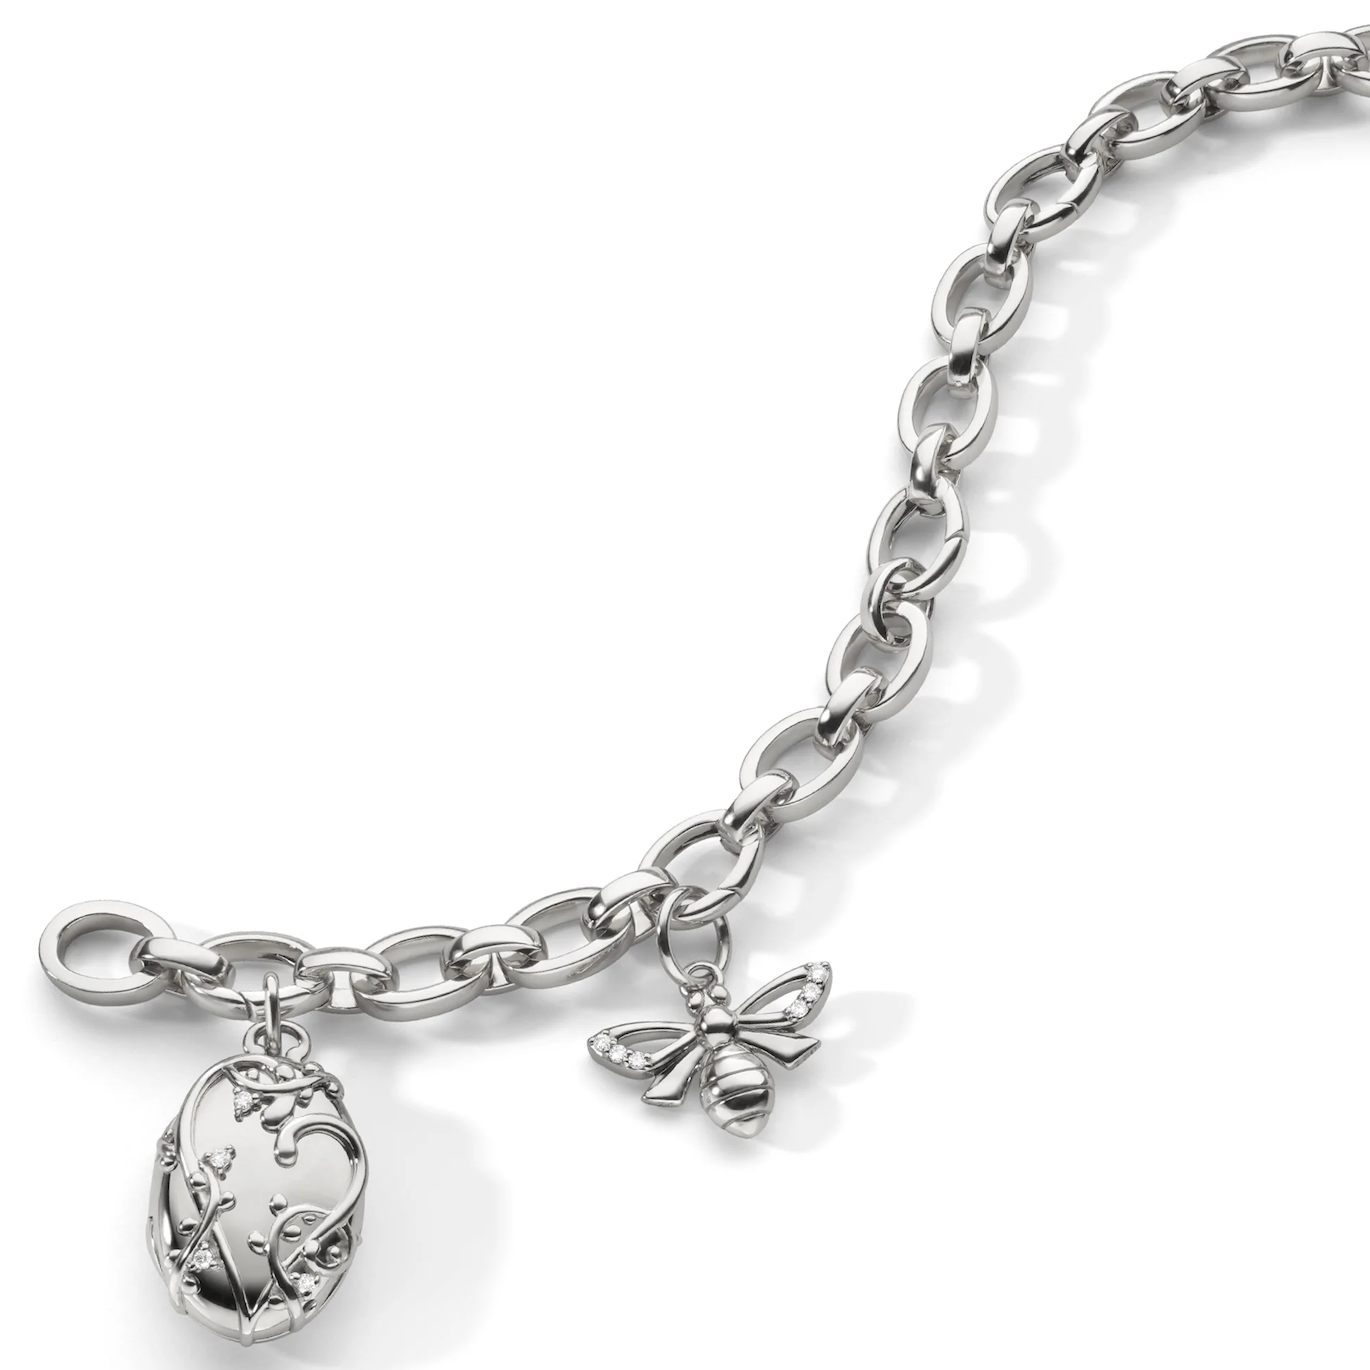 The "Wisteria" Locket and "Bee" Sterling Silver Charm Bracelet 